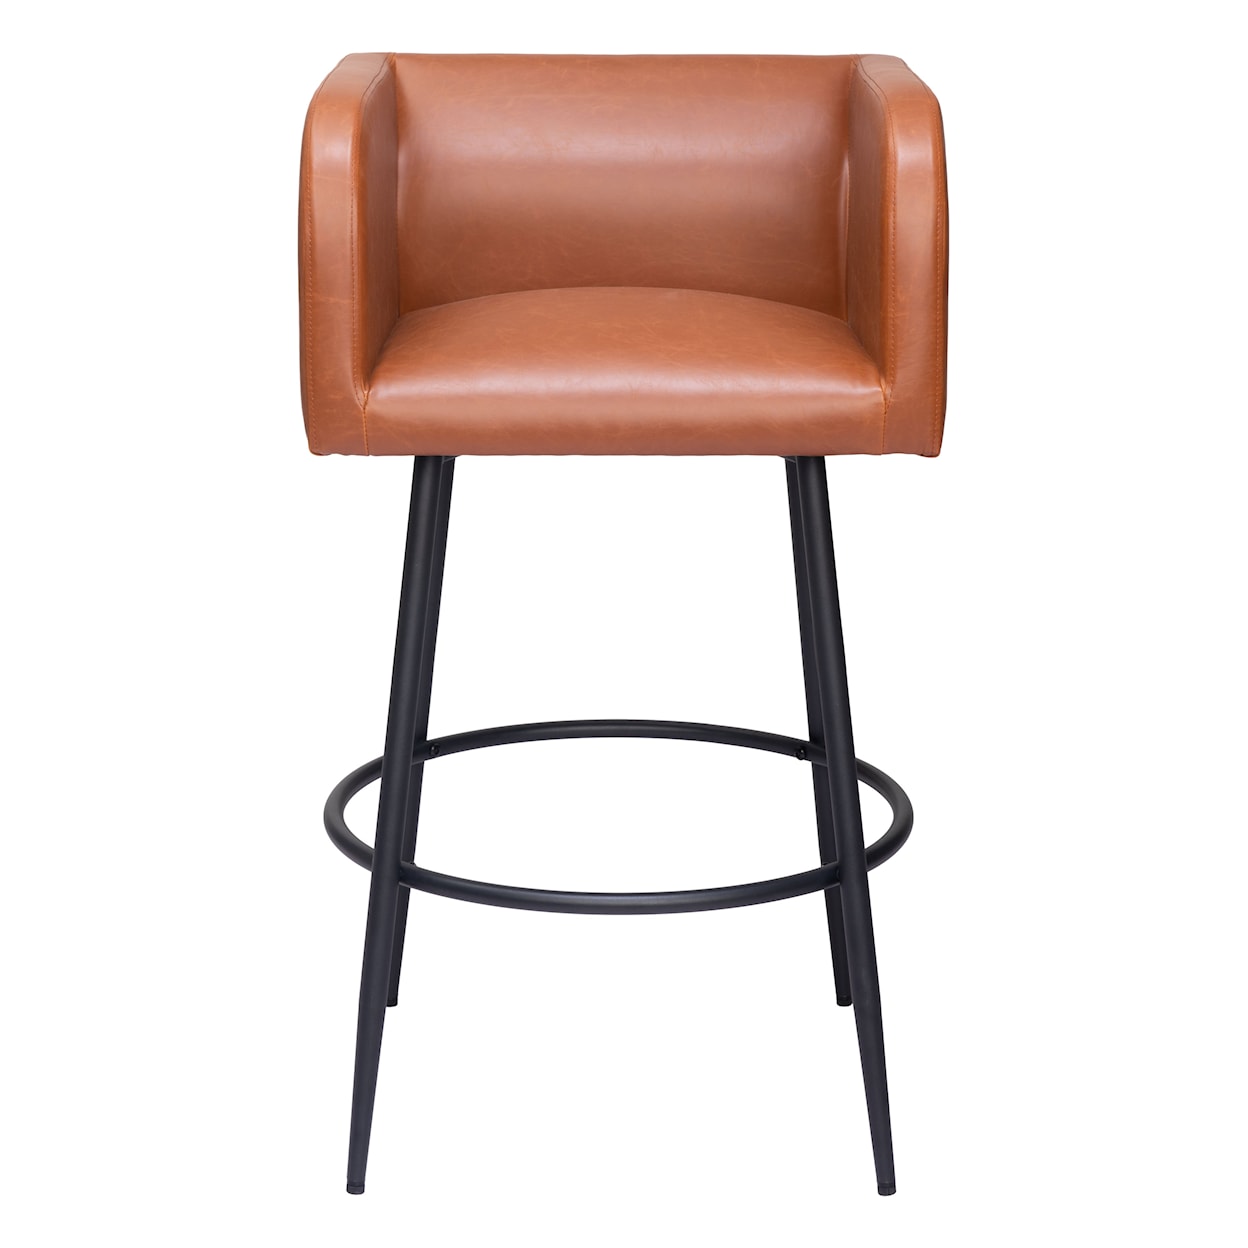 Zuo Horbat Collection Barstool